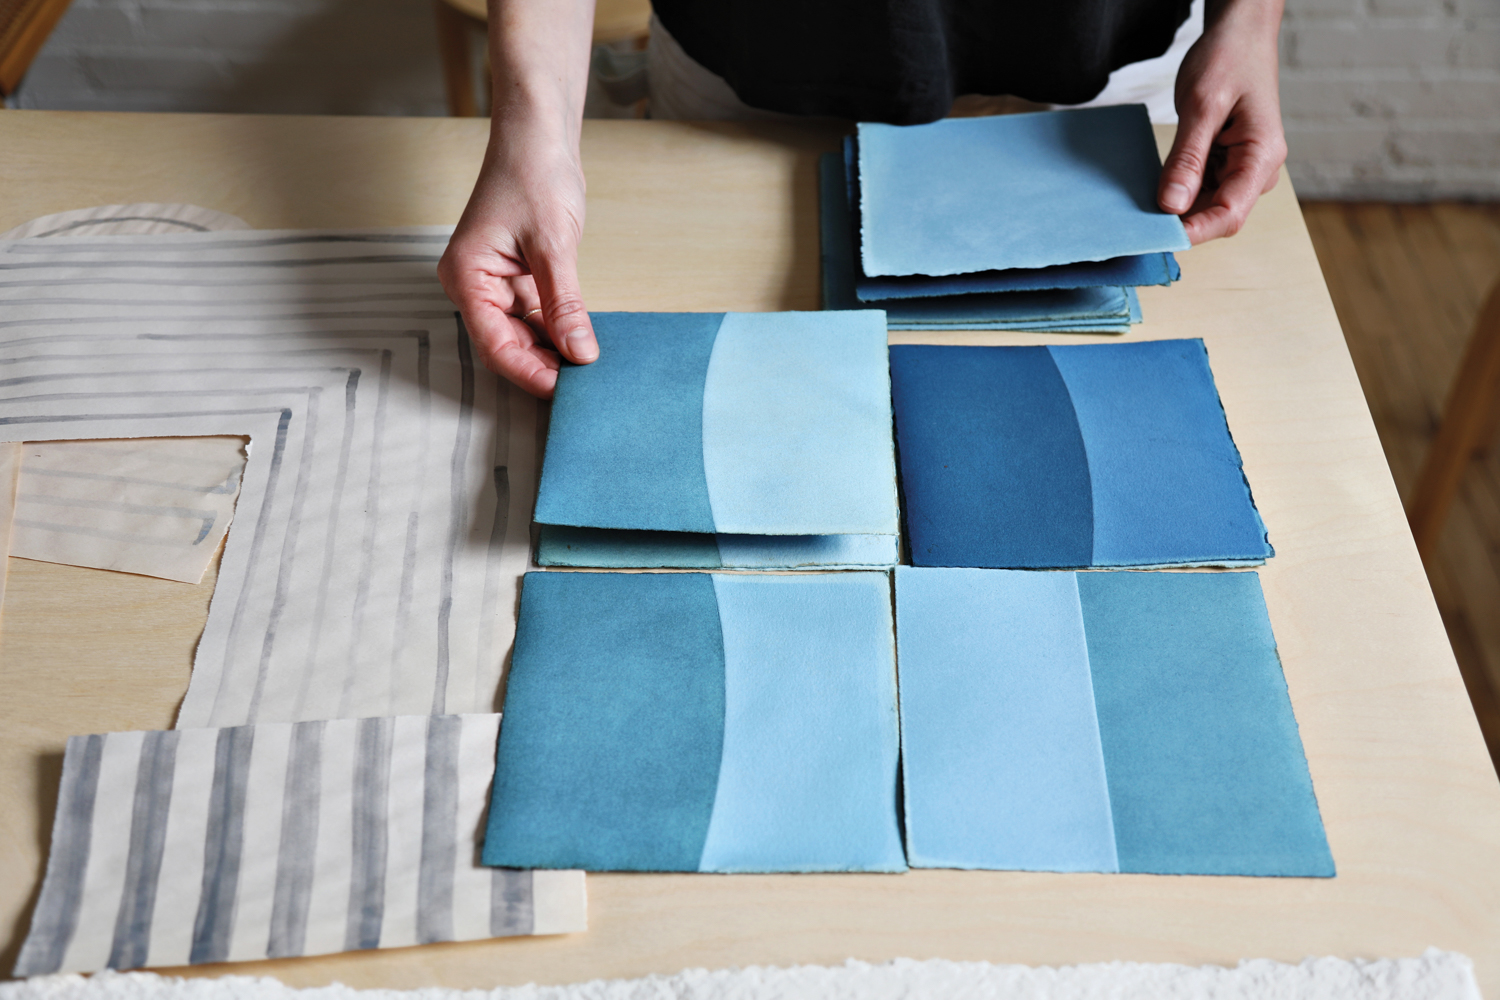 artist holding painted paper samples colored with indigo dye on a desktop workspace